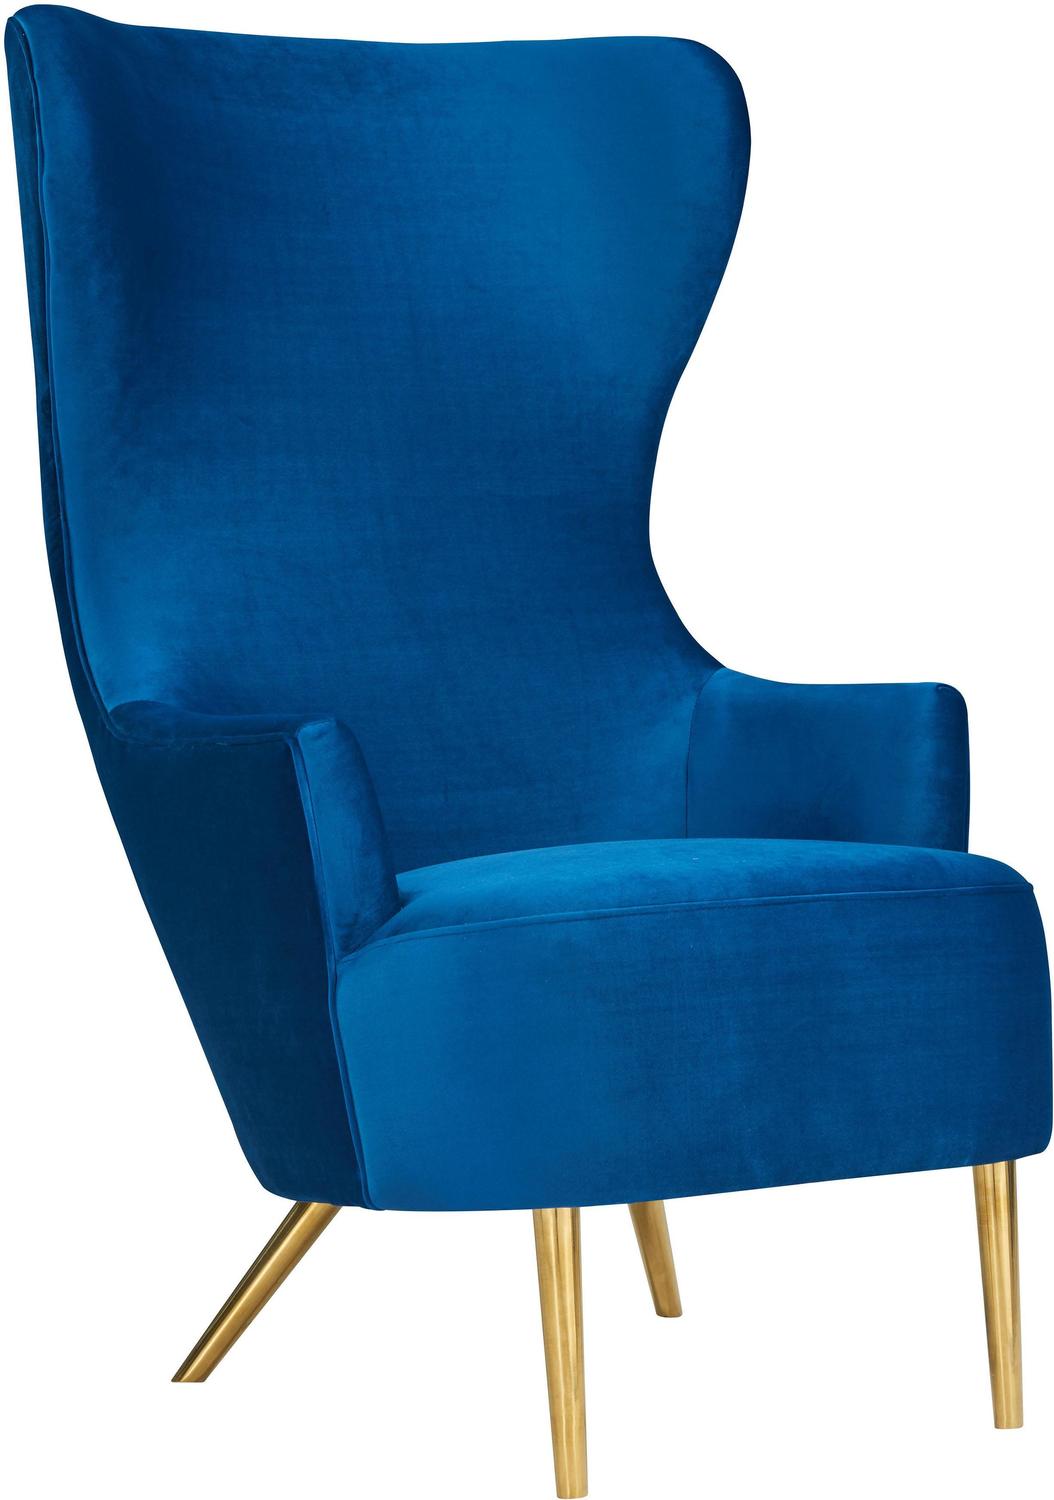  Contemporary Design Furniture Accent Chairs Chairs Navy